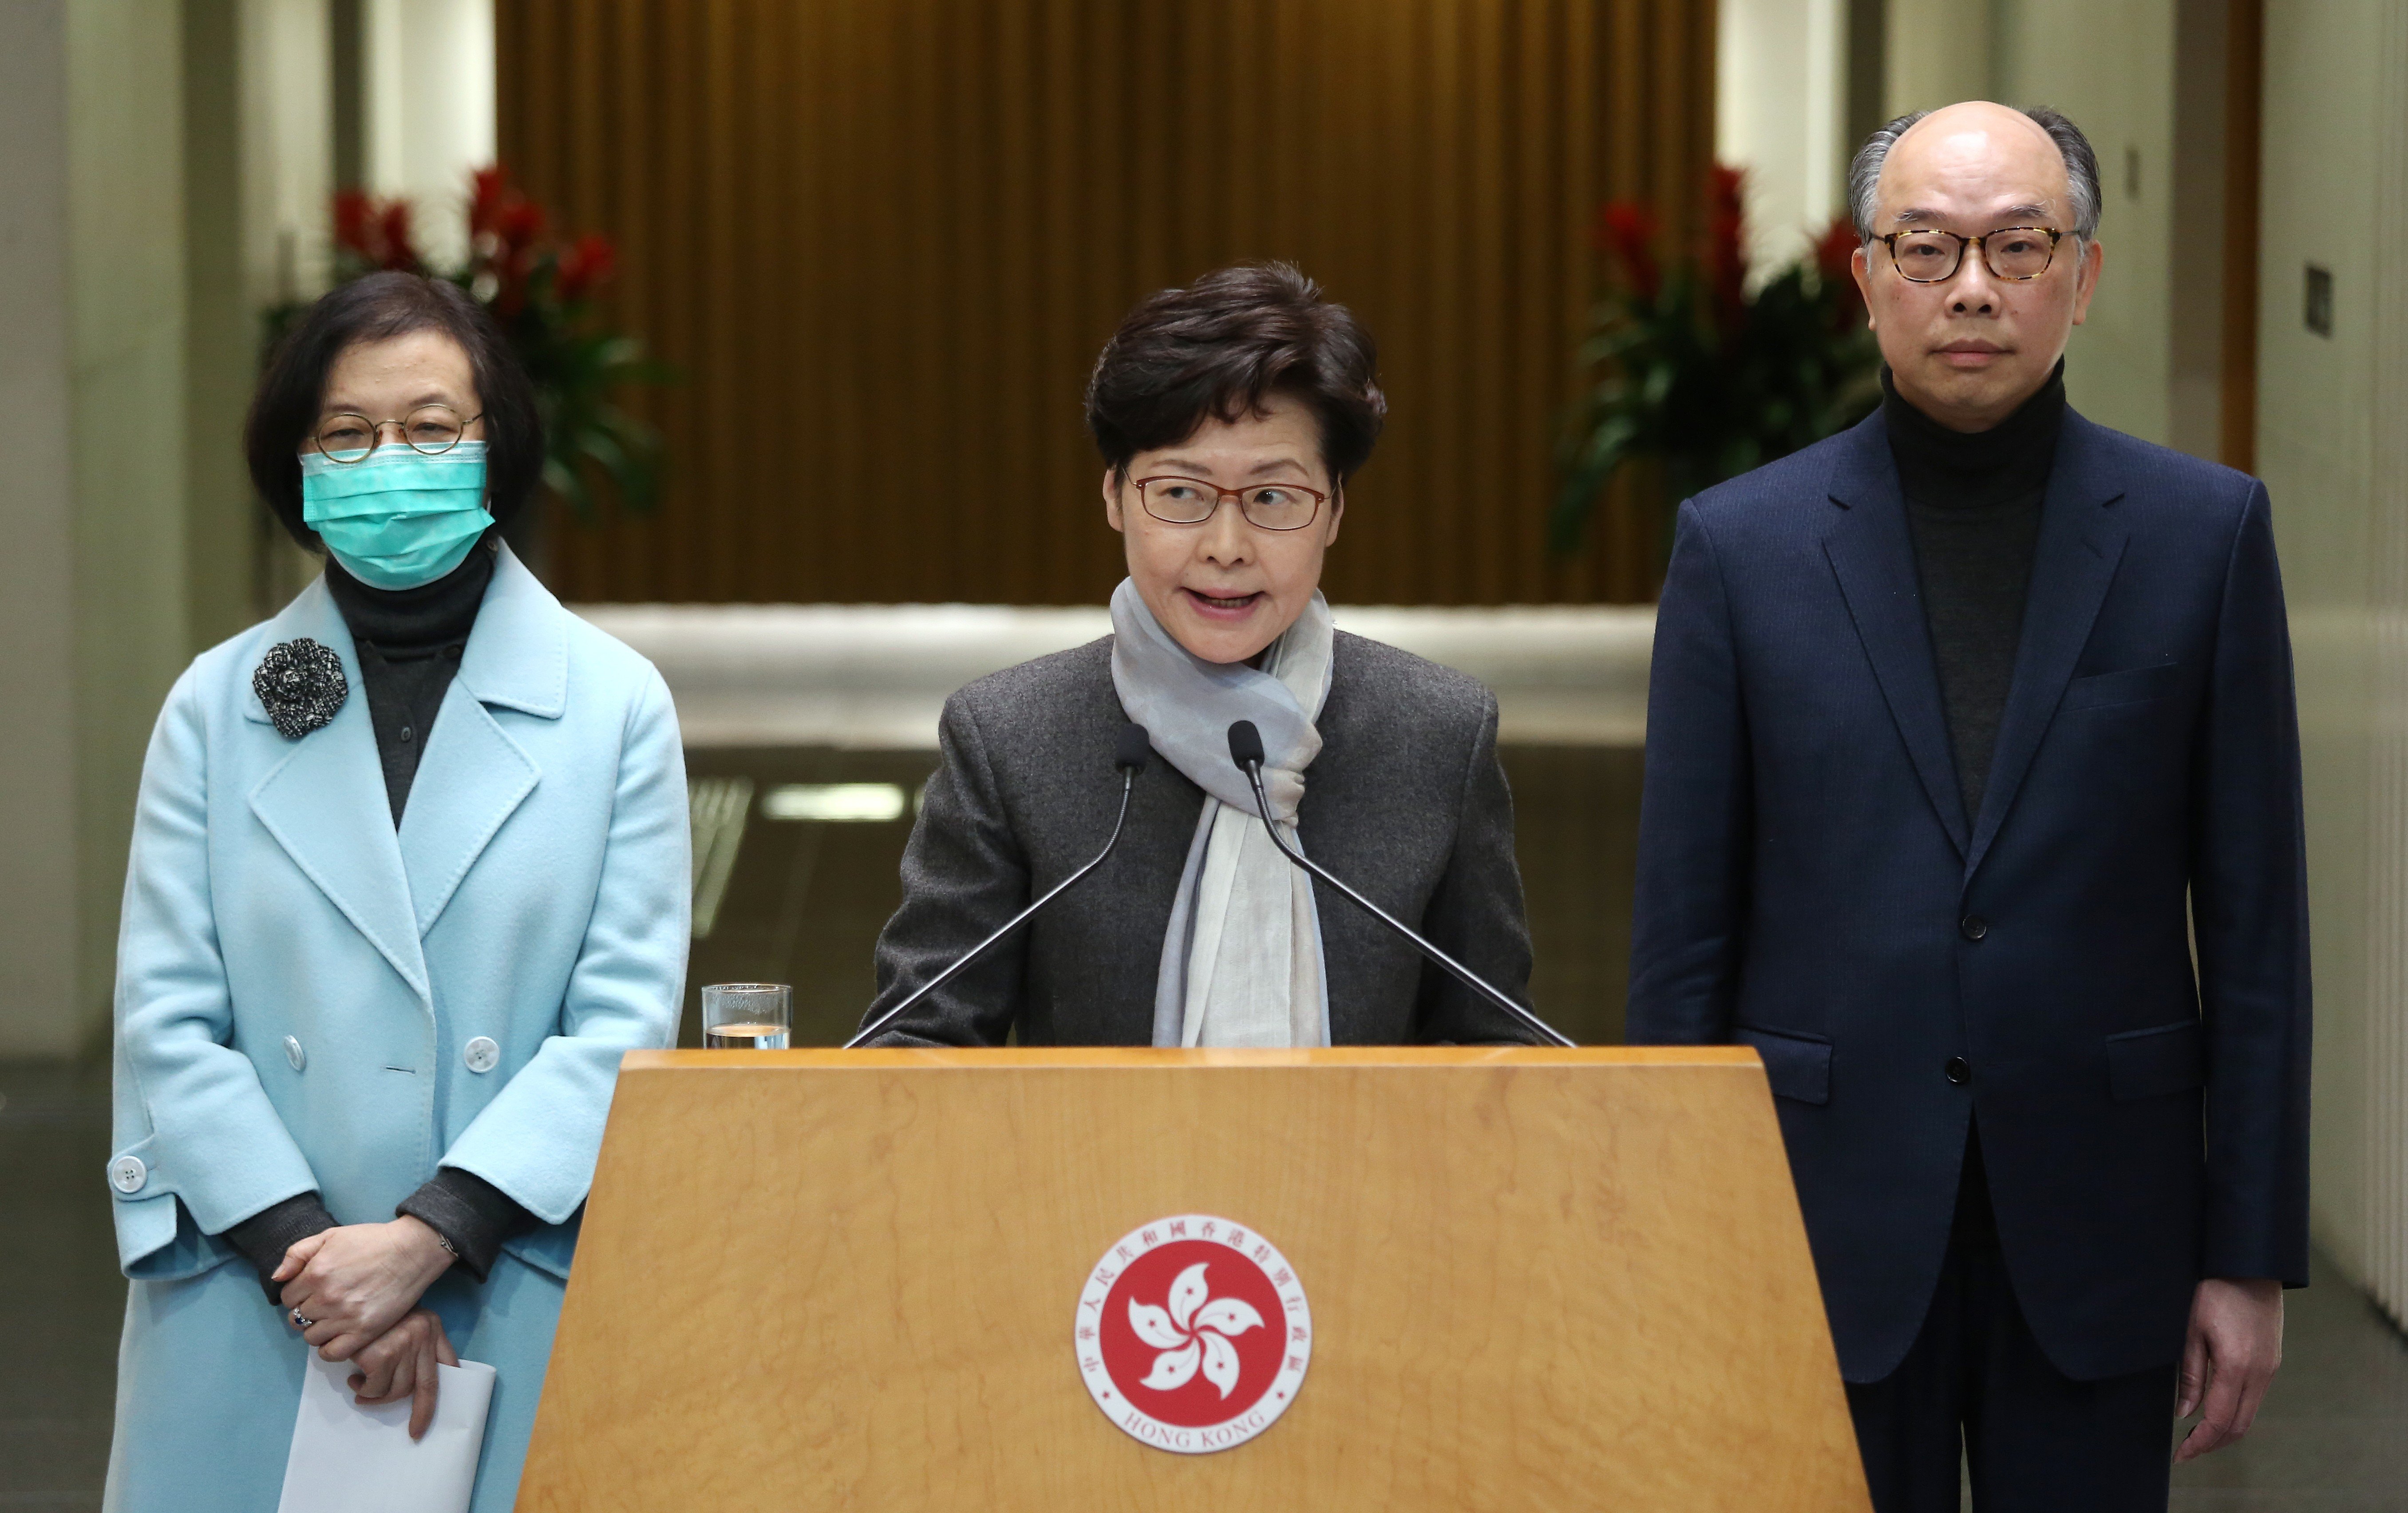 Chief Executive Carrie Lam, flanked by Secretary for Food and Health Sophia Chan Siu-chee and Secretary for Transport and Housing Frank Chan Fan, meets the media on February 11. Photo: Jonathan Wong